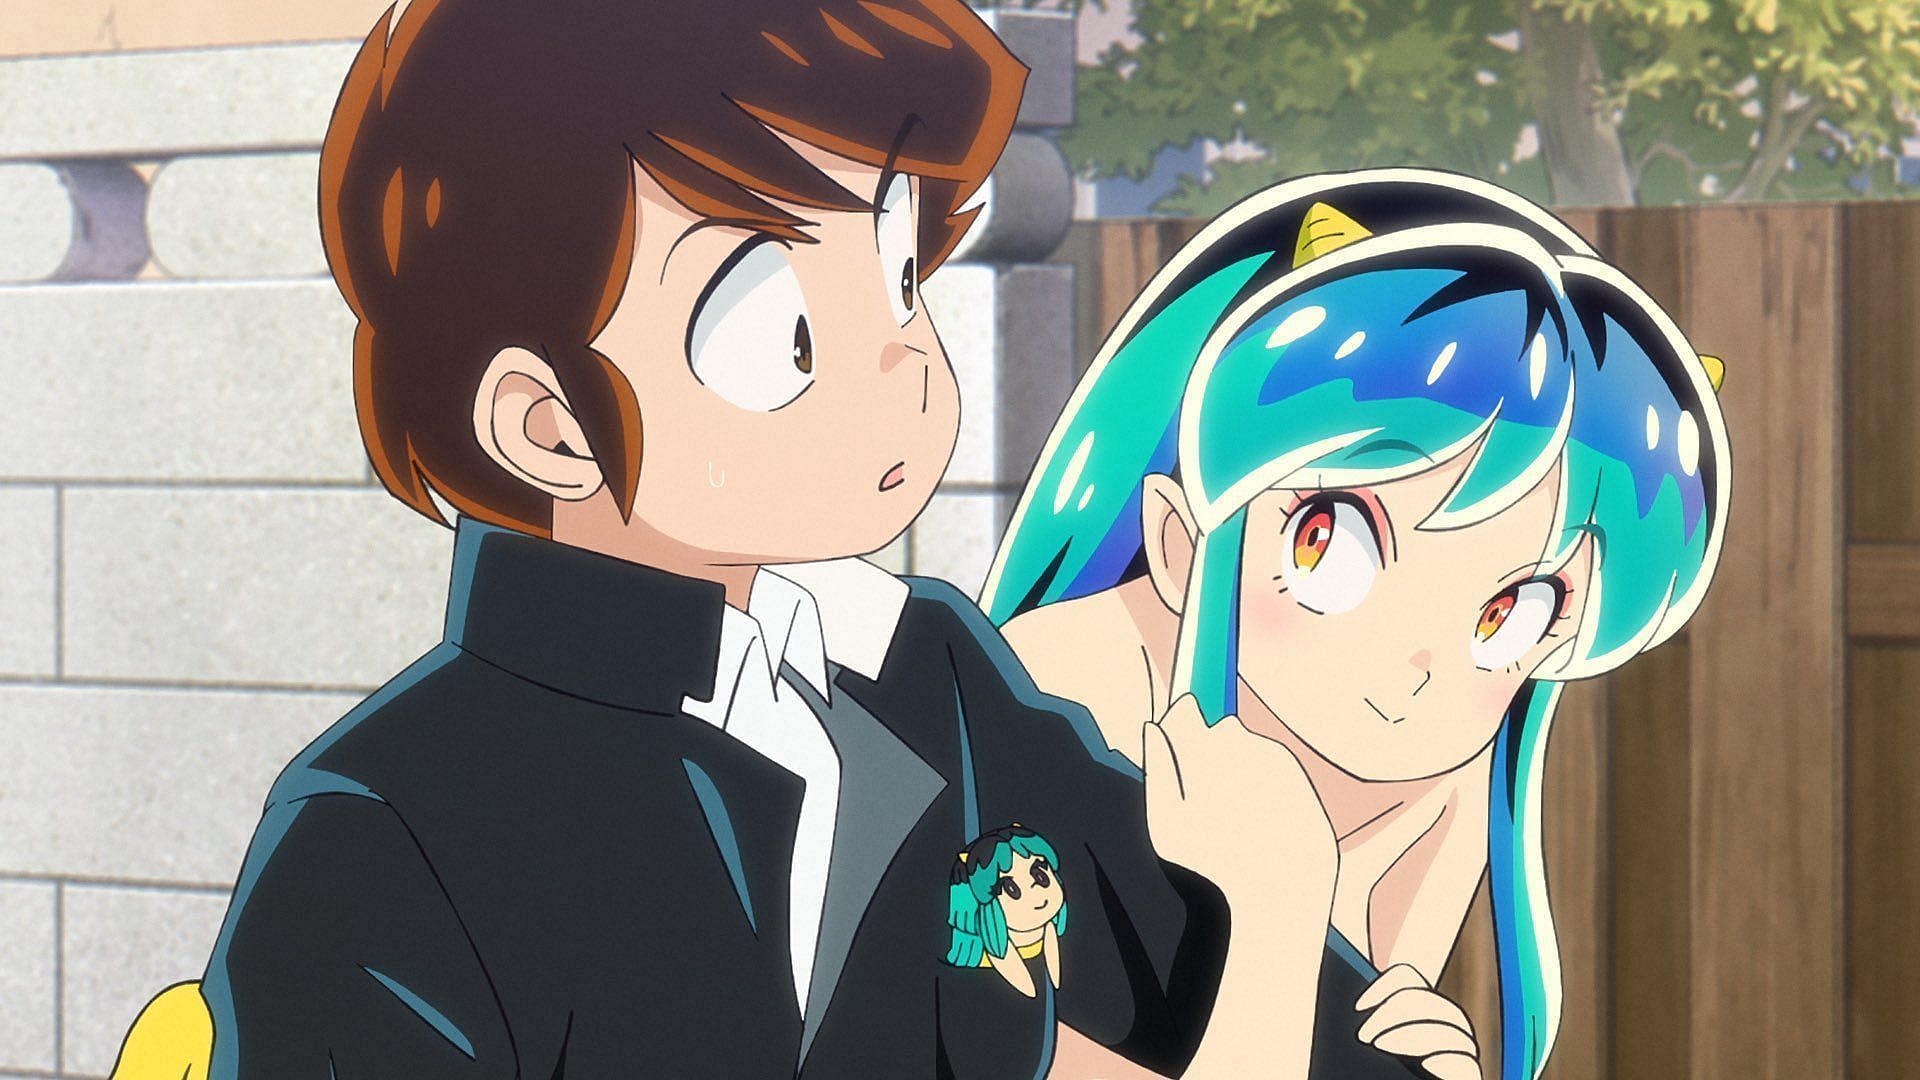 The Remake of Urusei Yatsura is Now Available to Stream on HiDive